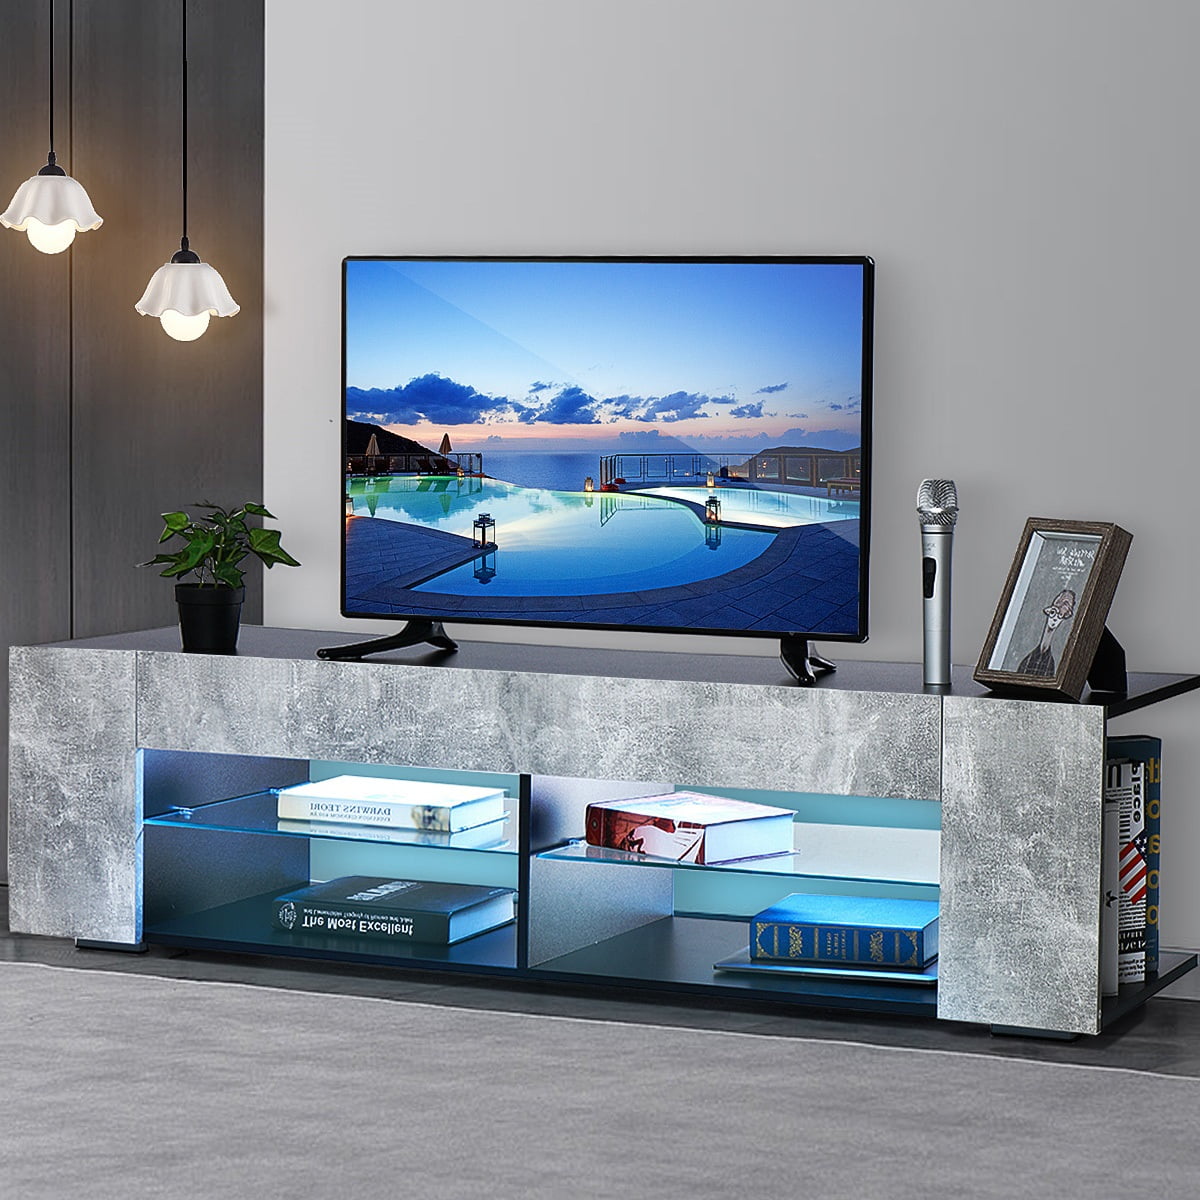 Hommpa LED TV Stand for TVs up to 65 Modern TV Cabinet with 2 Doors and  Glass Shelf Wooden Media Storage Stand Entertainment Centers White